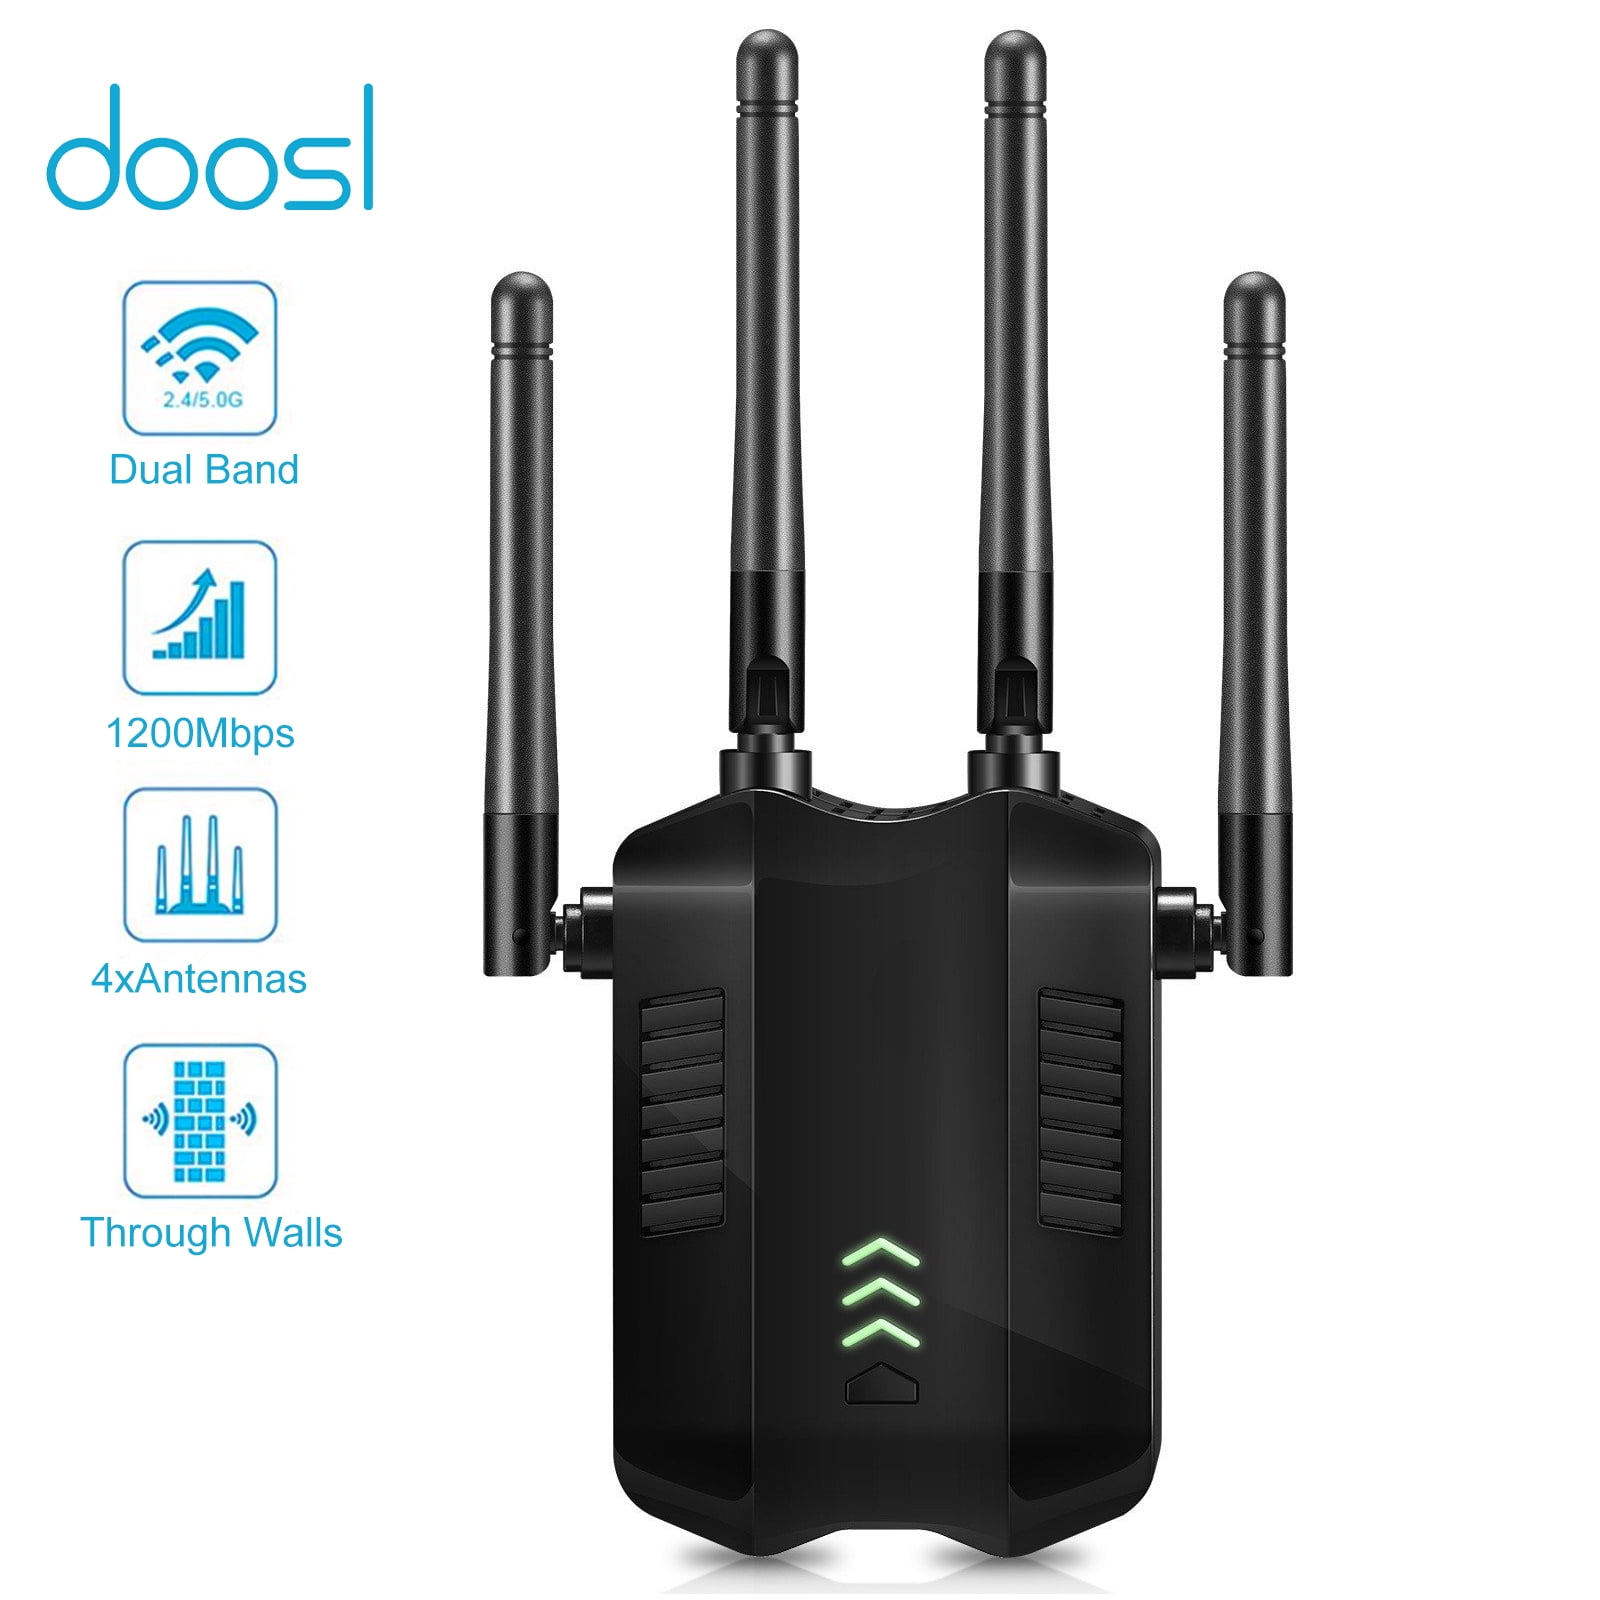 2000FT Wide Range of Signals WiFi Range Extender 1200Mbps WiFi Booster AC1200 for The Hourse Repeater 2.4 & 5GHz Dual Band WPS Wireless Signal Strong Penetrability Enjoy Gaming 